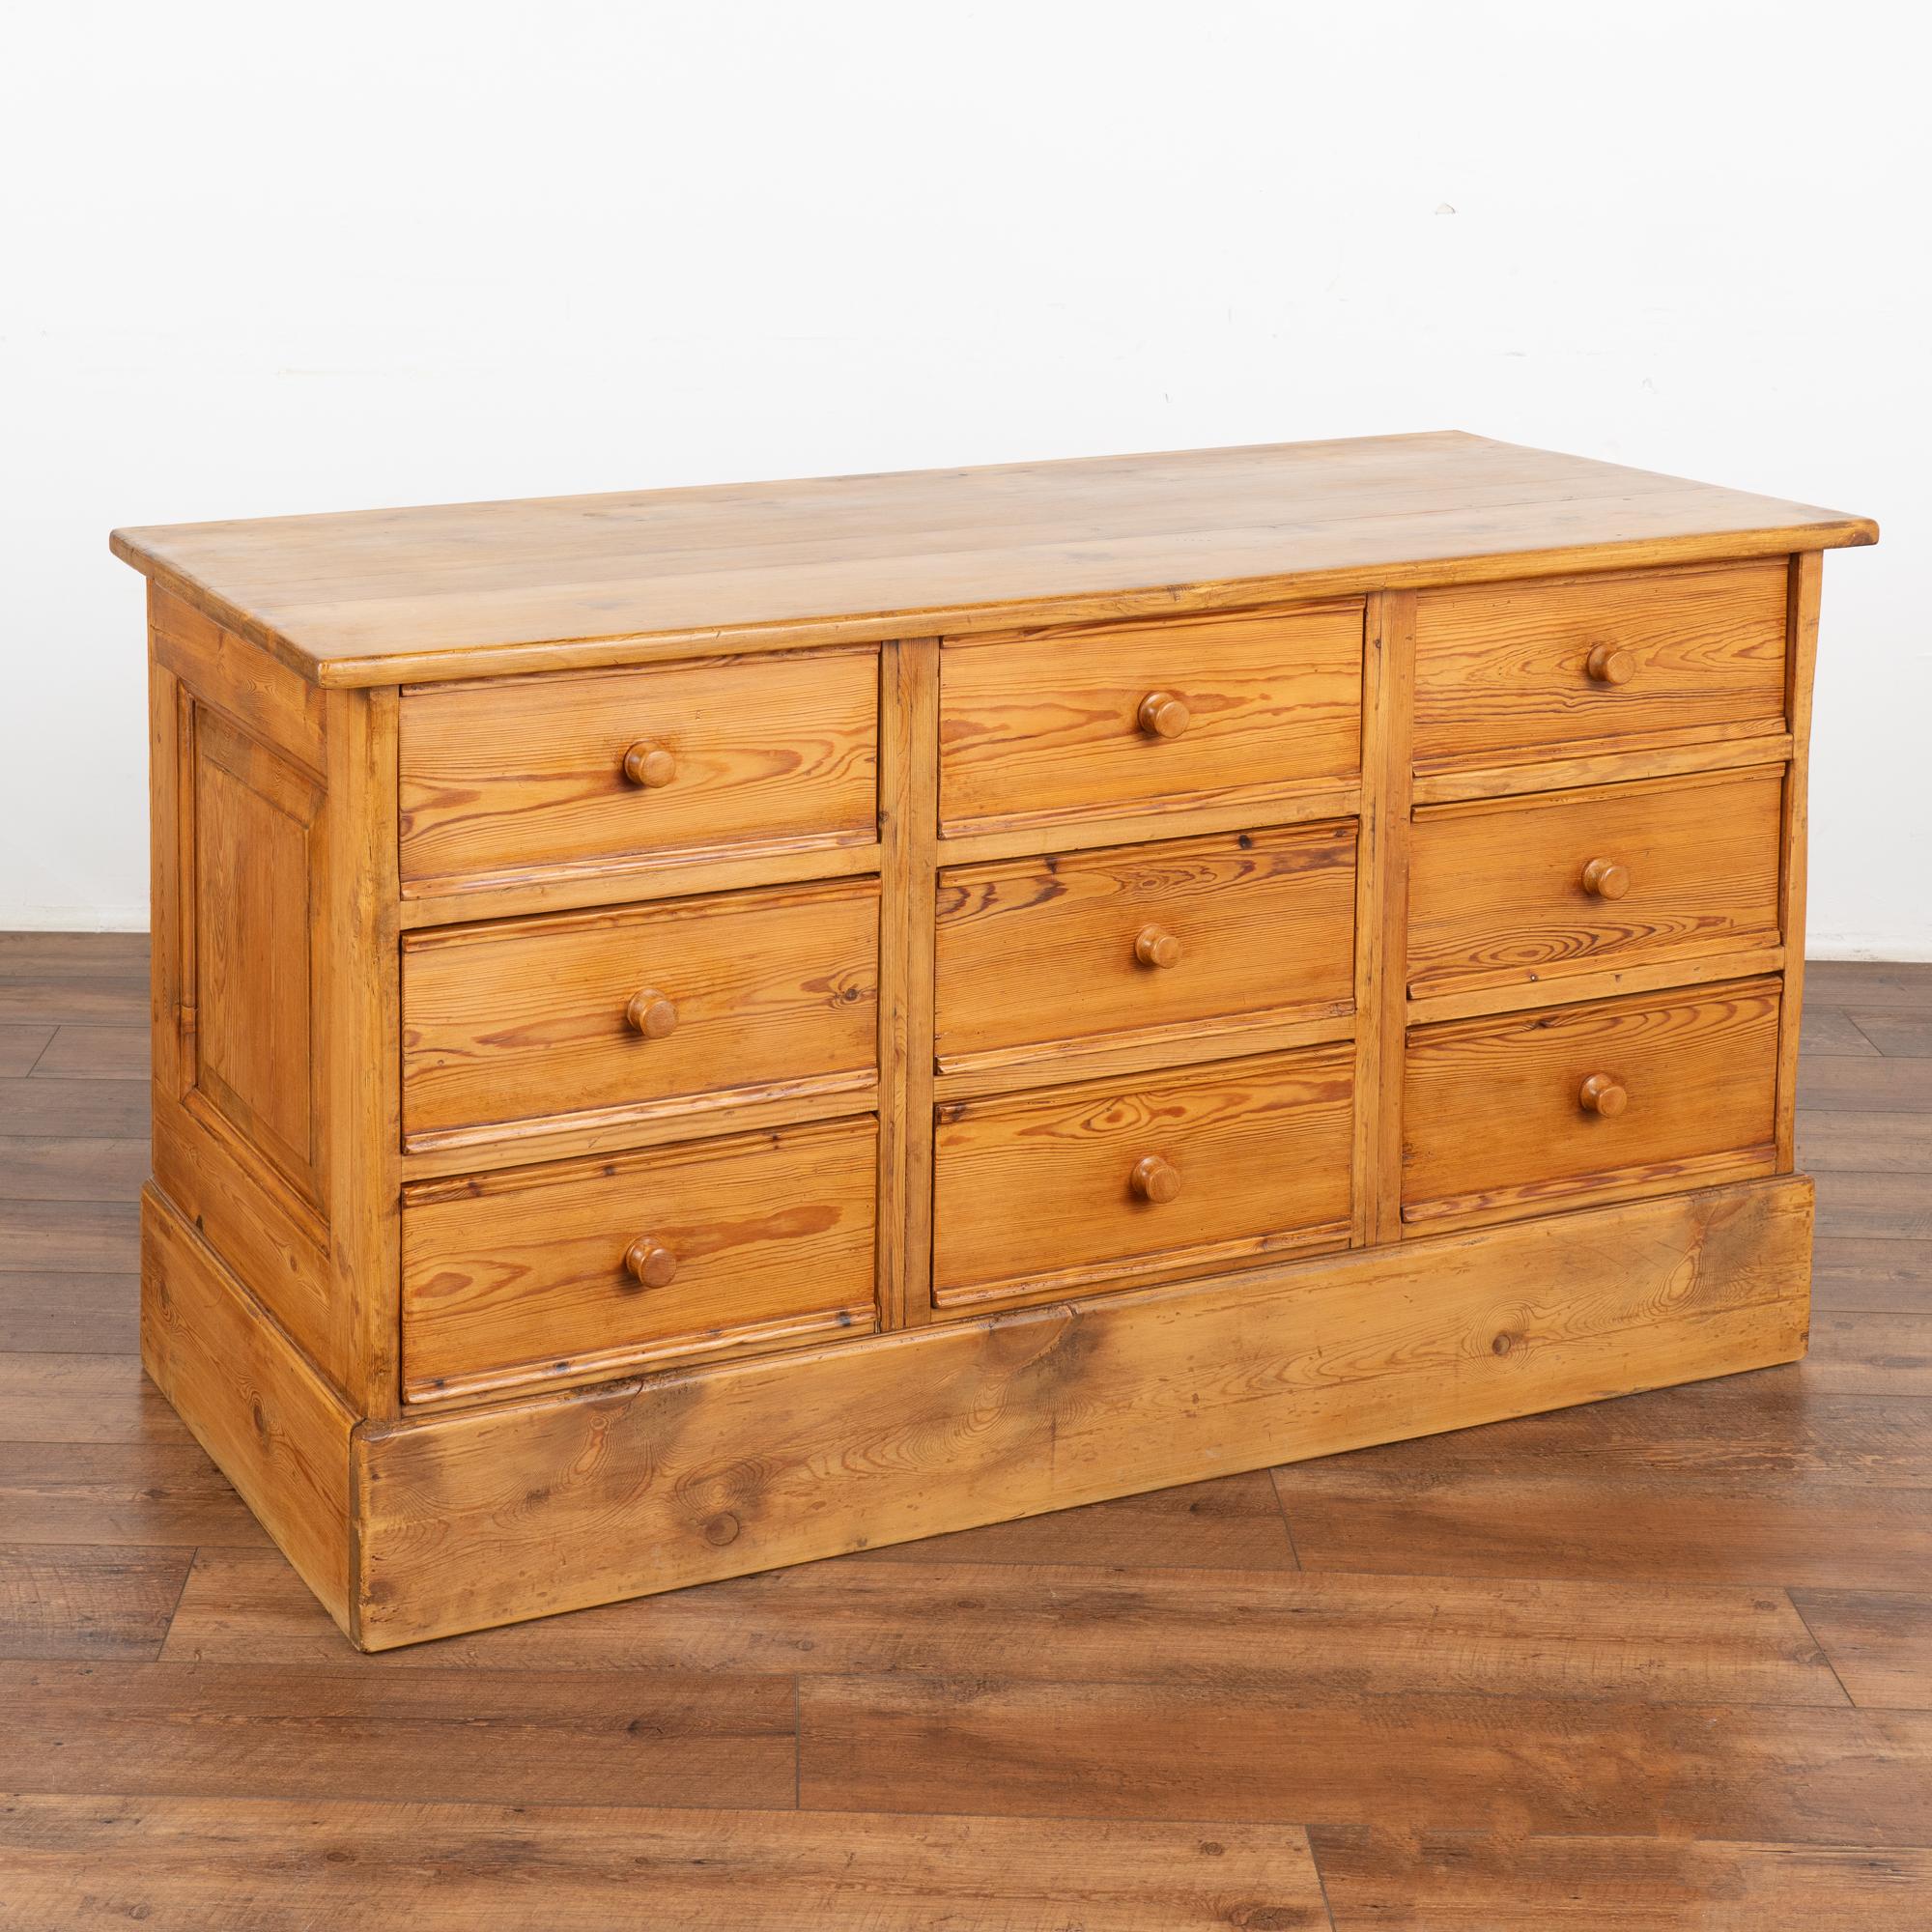 Fun and function combine in this pine chest of 9 drawers that likely originally served as a shop counter or storage cabinet. Counters similar to this were used throughout shops in European and are a great way to incorporate old world charm and